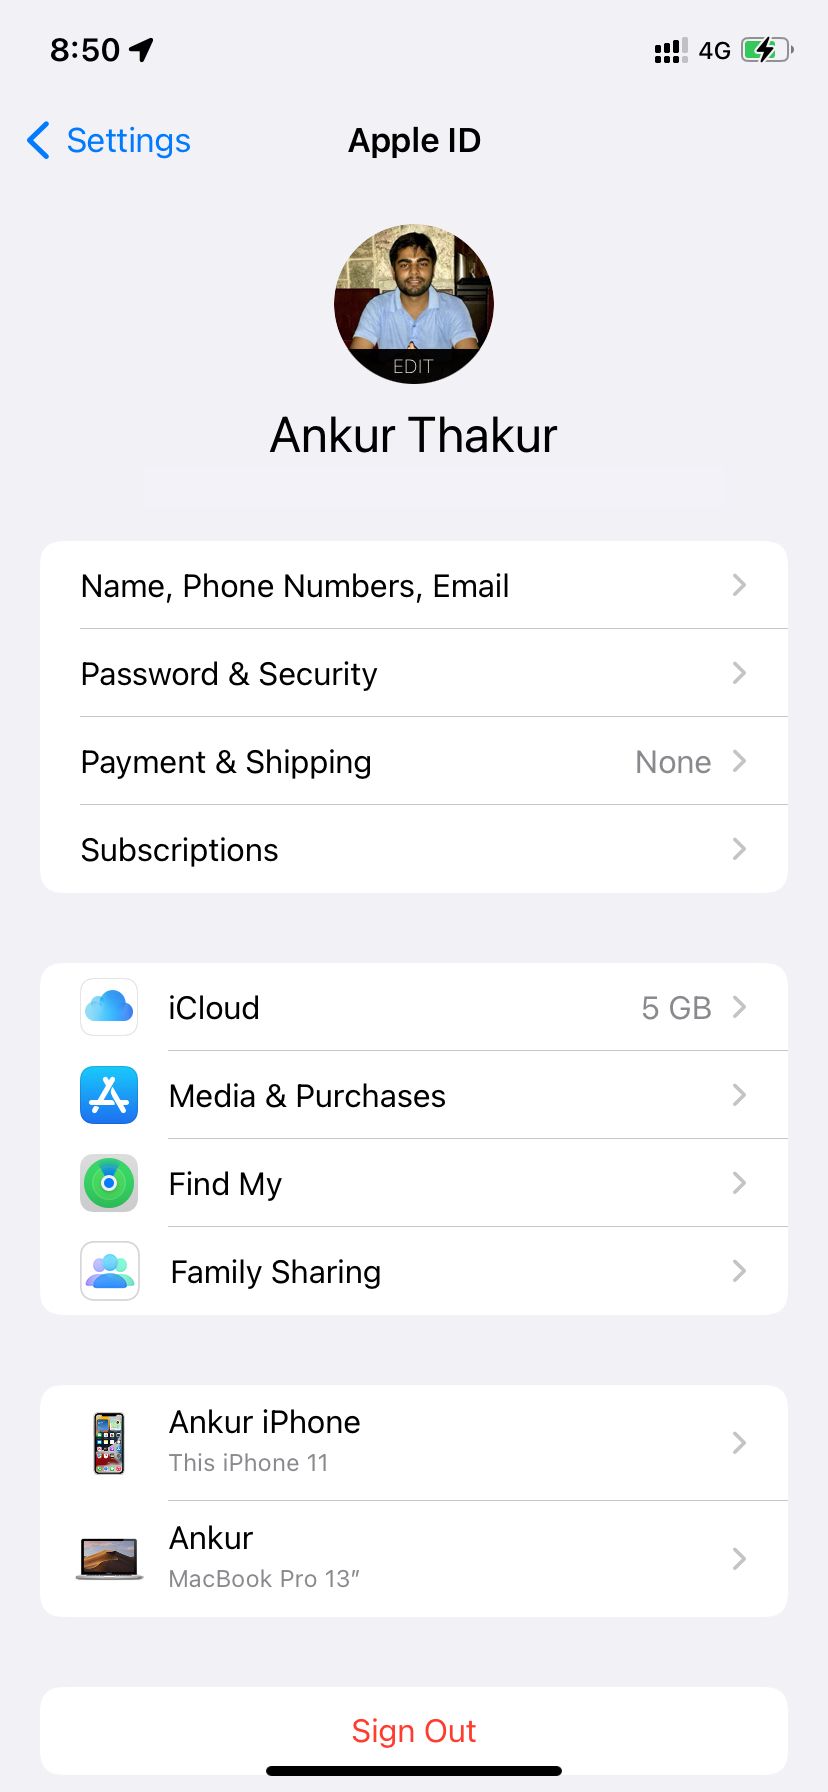 Apple ID settings page with Find My option